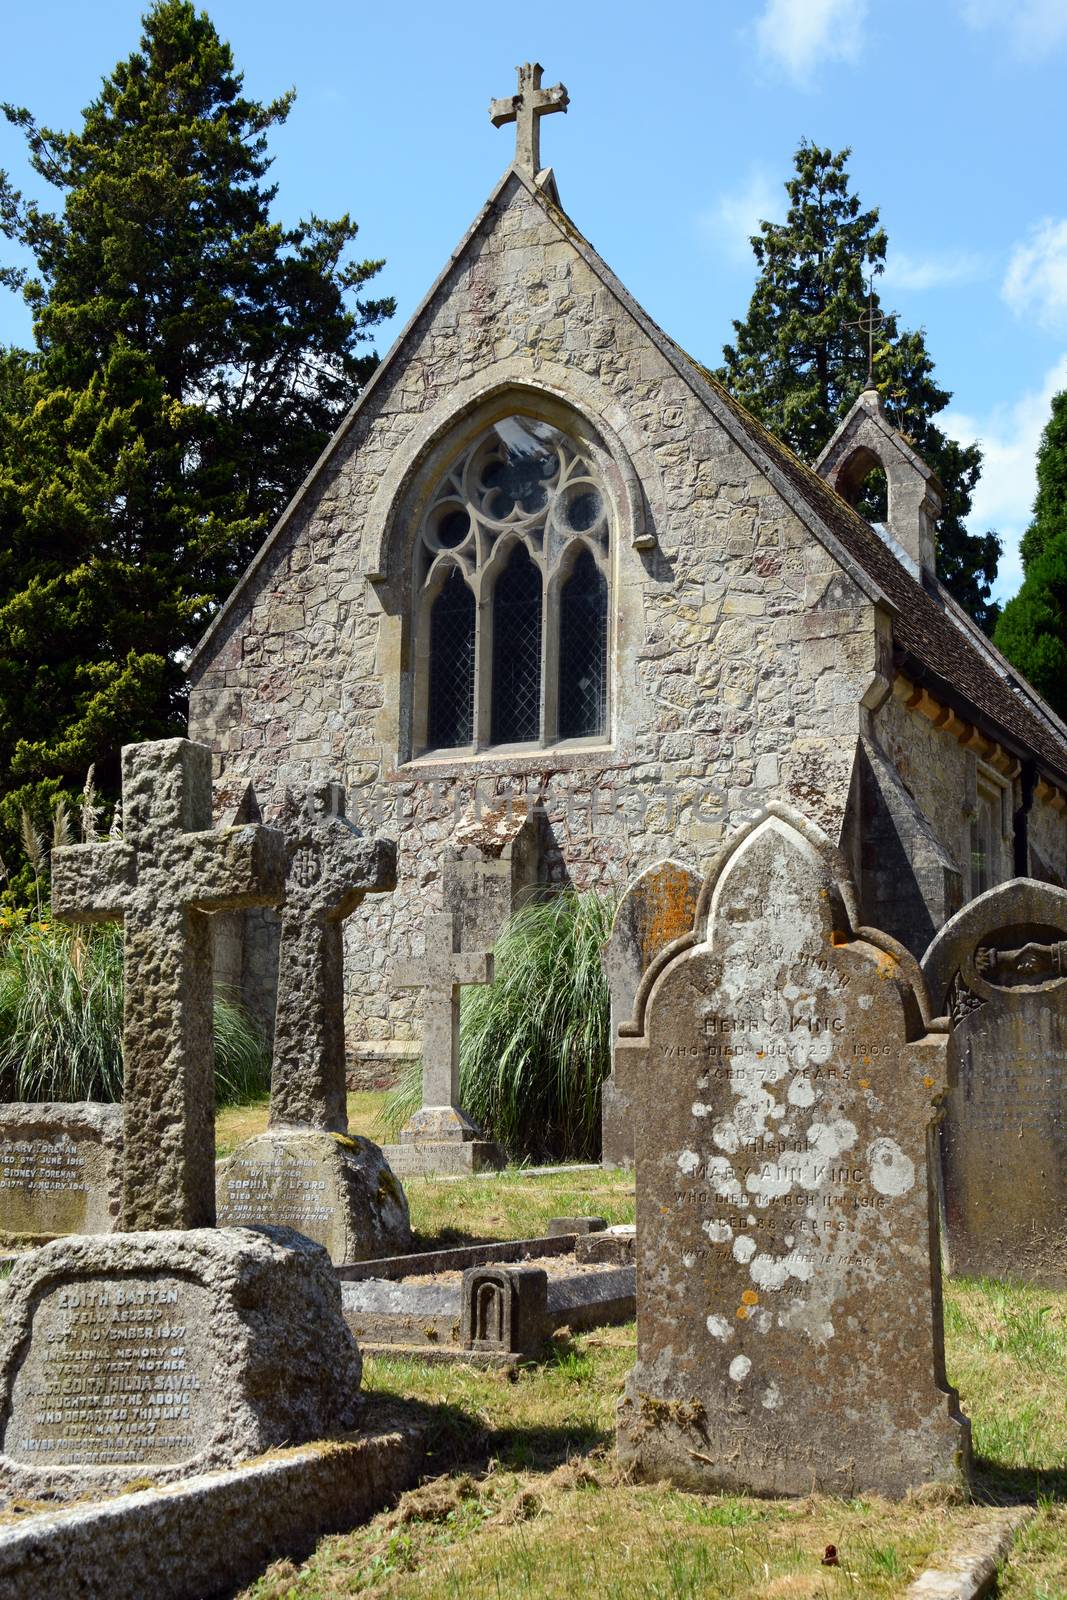 Lyndhurst, UK - July 13, 2014: Small stone chapel in the village of Lyndhurst in the New Forest, surrounded by a variety of weathered tombstones